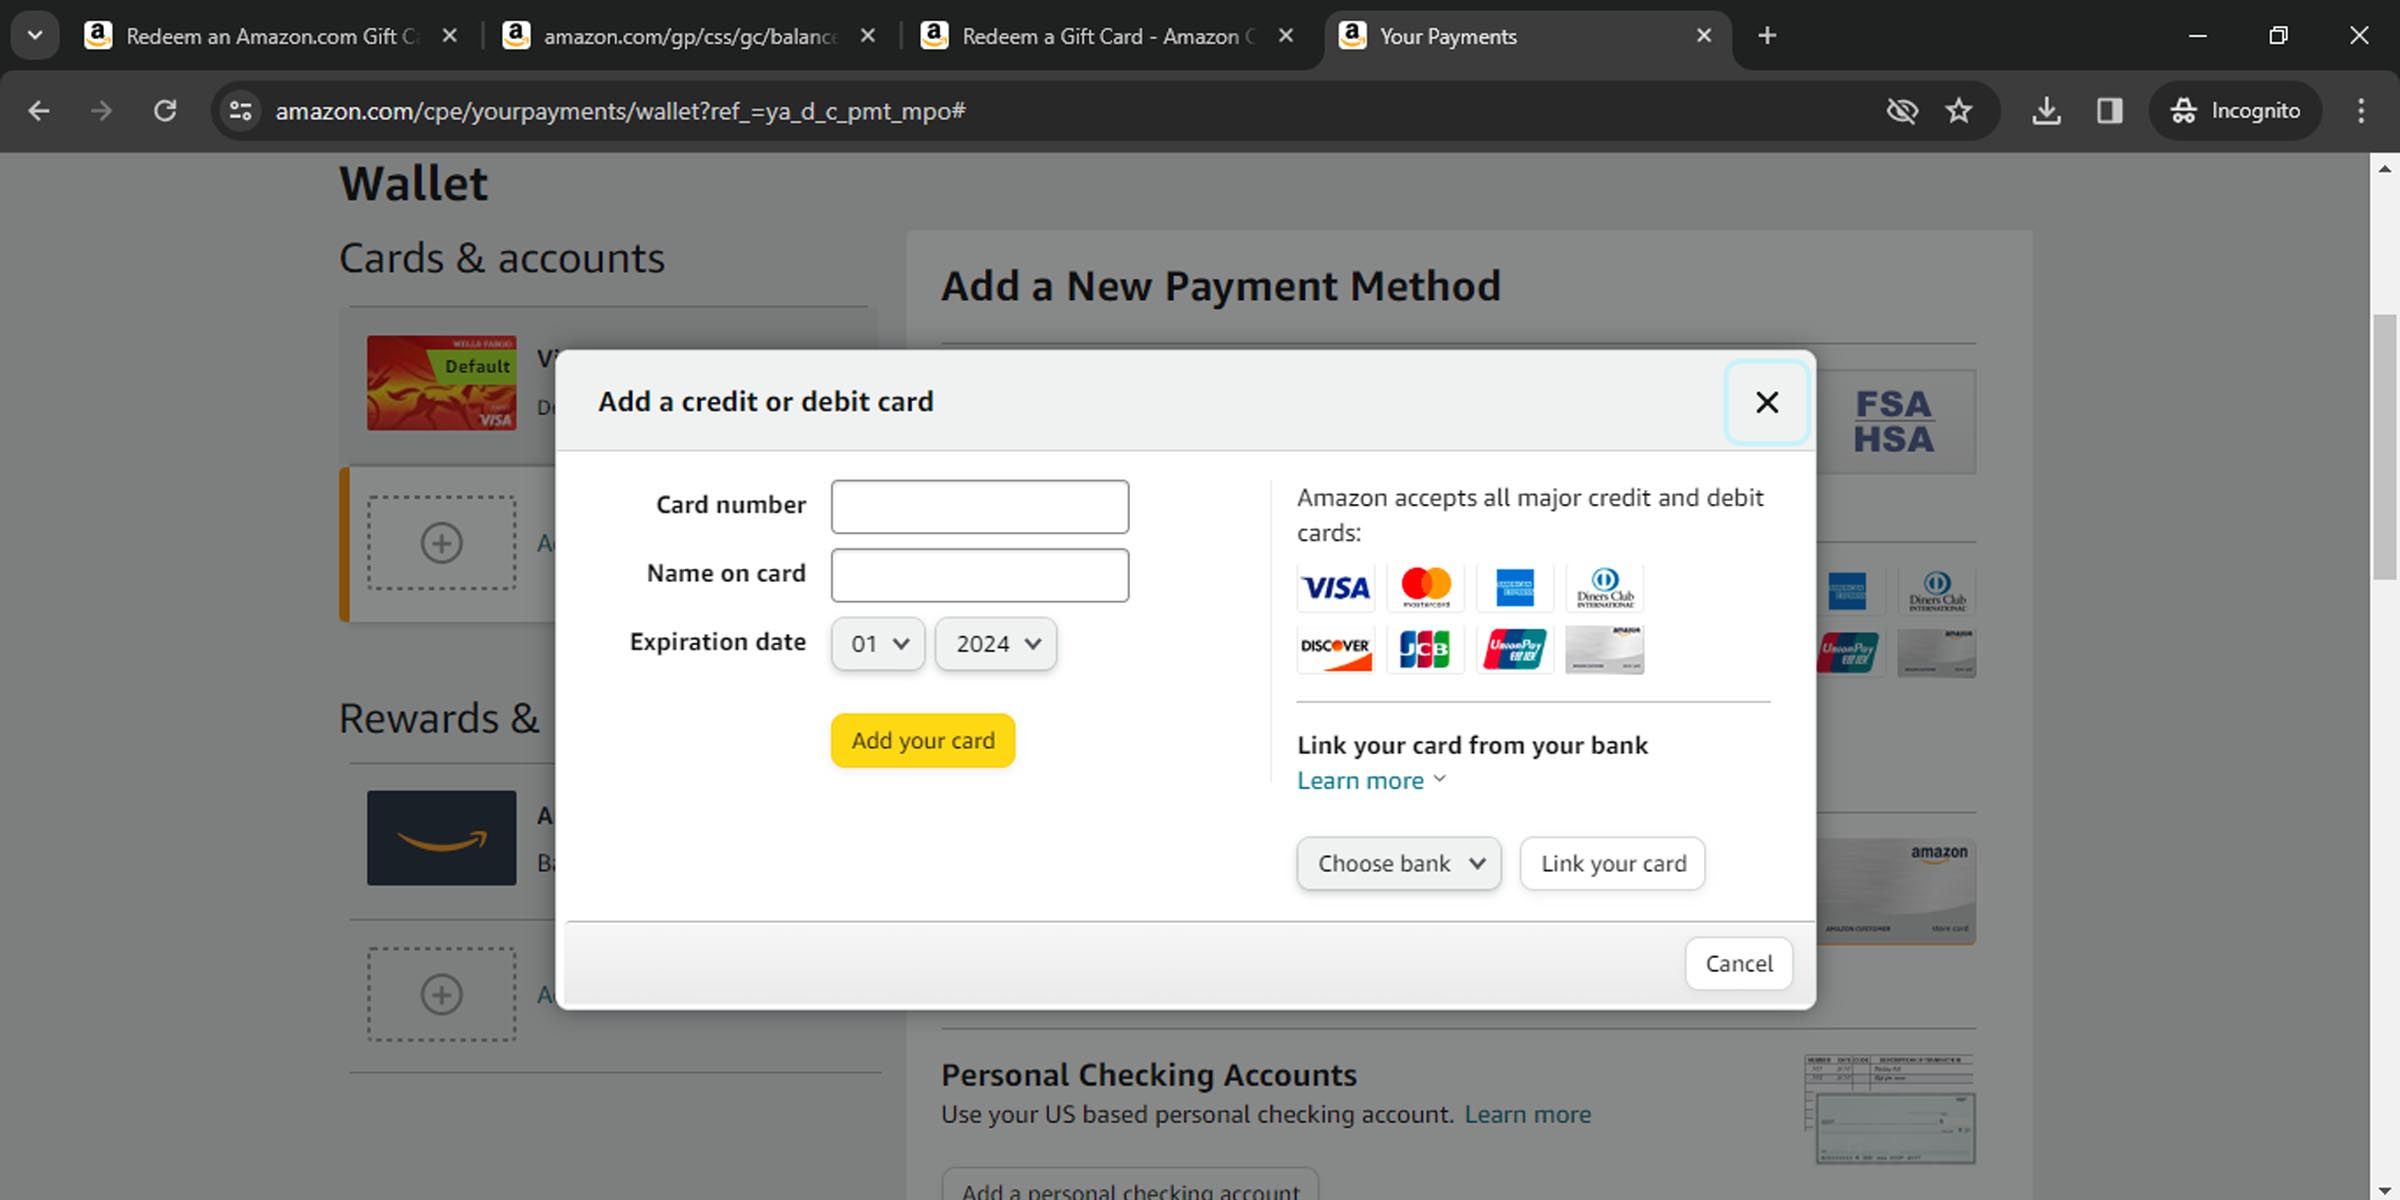 Enter information on your new Amazon payment method 